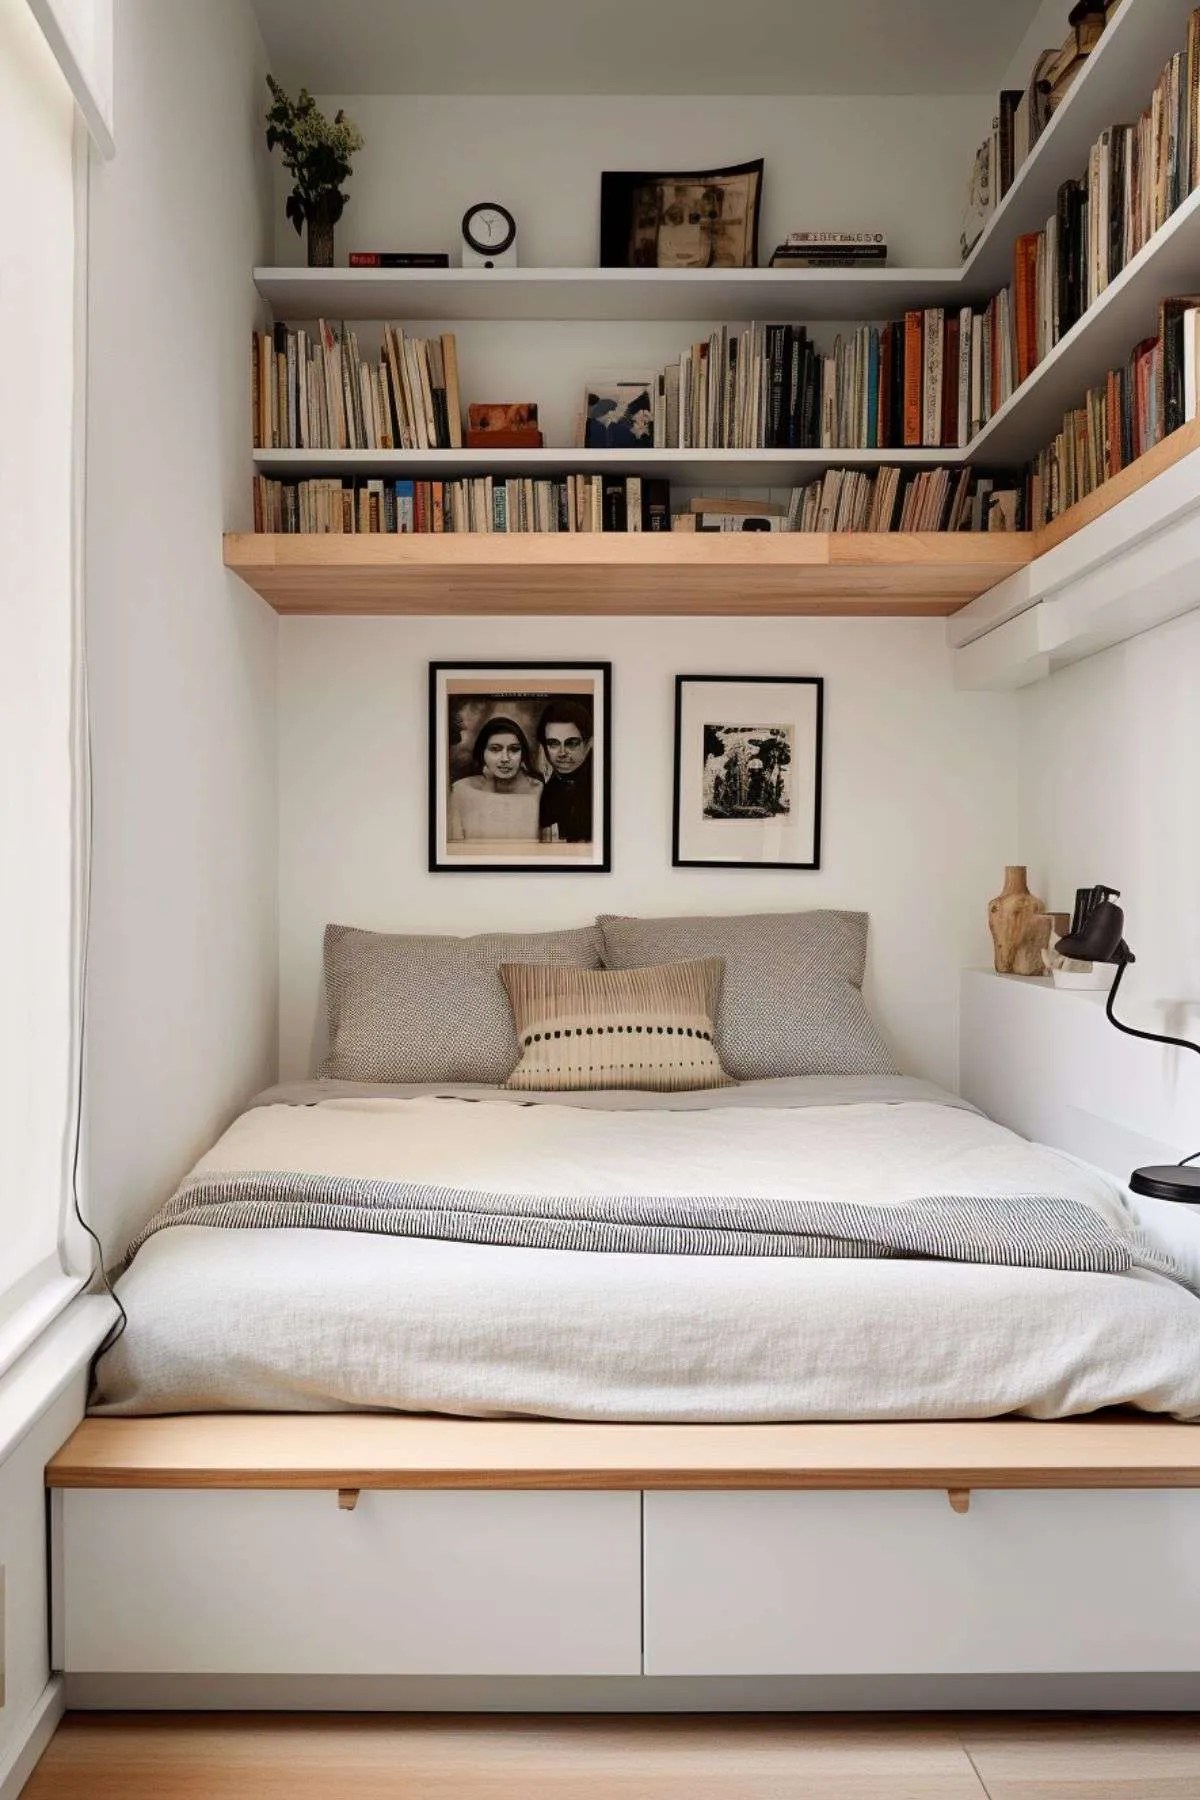 How to Organise a Small Bedroom and Increase Your Space